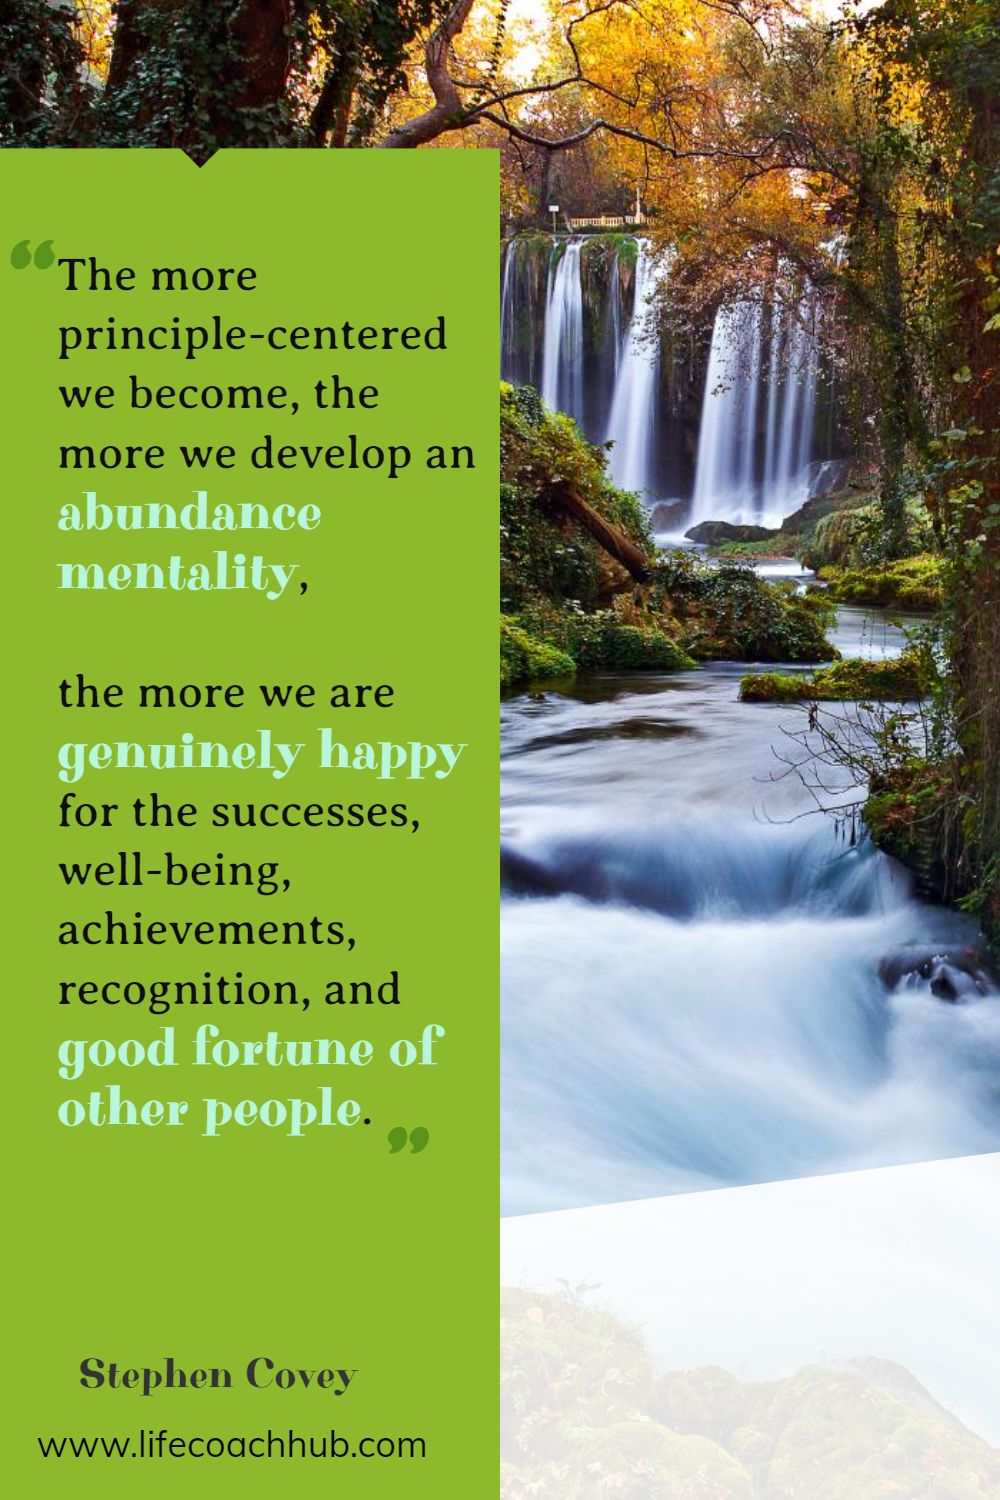 The more principle-centered we become, the more we develop an abundance mentality, the more we are genuinely happy for the successes, well-being, achievements, recognition, and good fortune of other people. Stephen Covey Coaching Quote